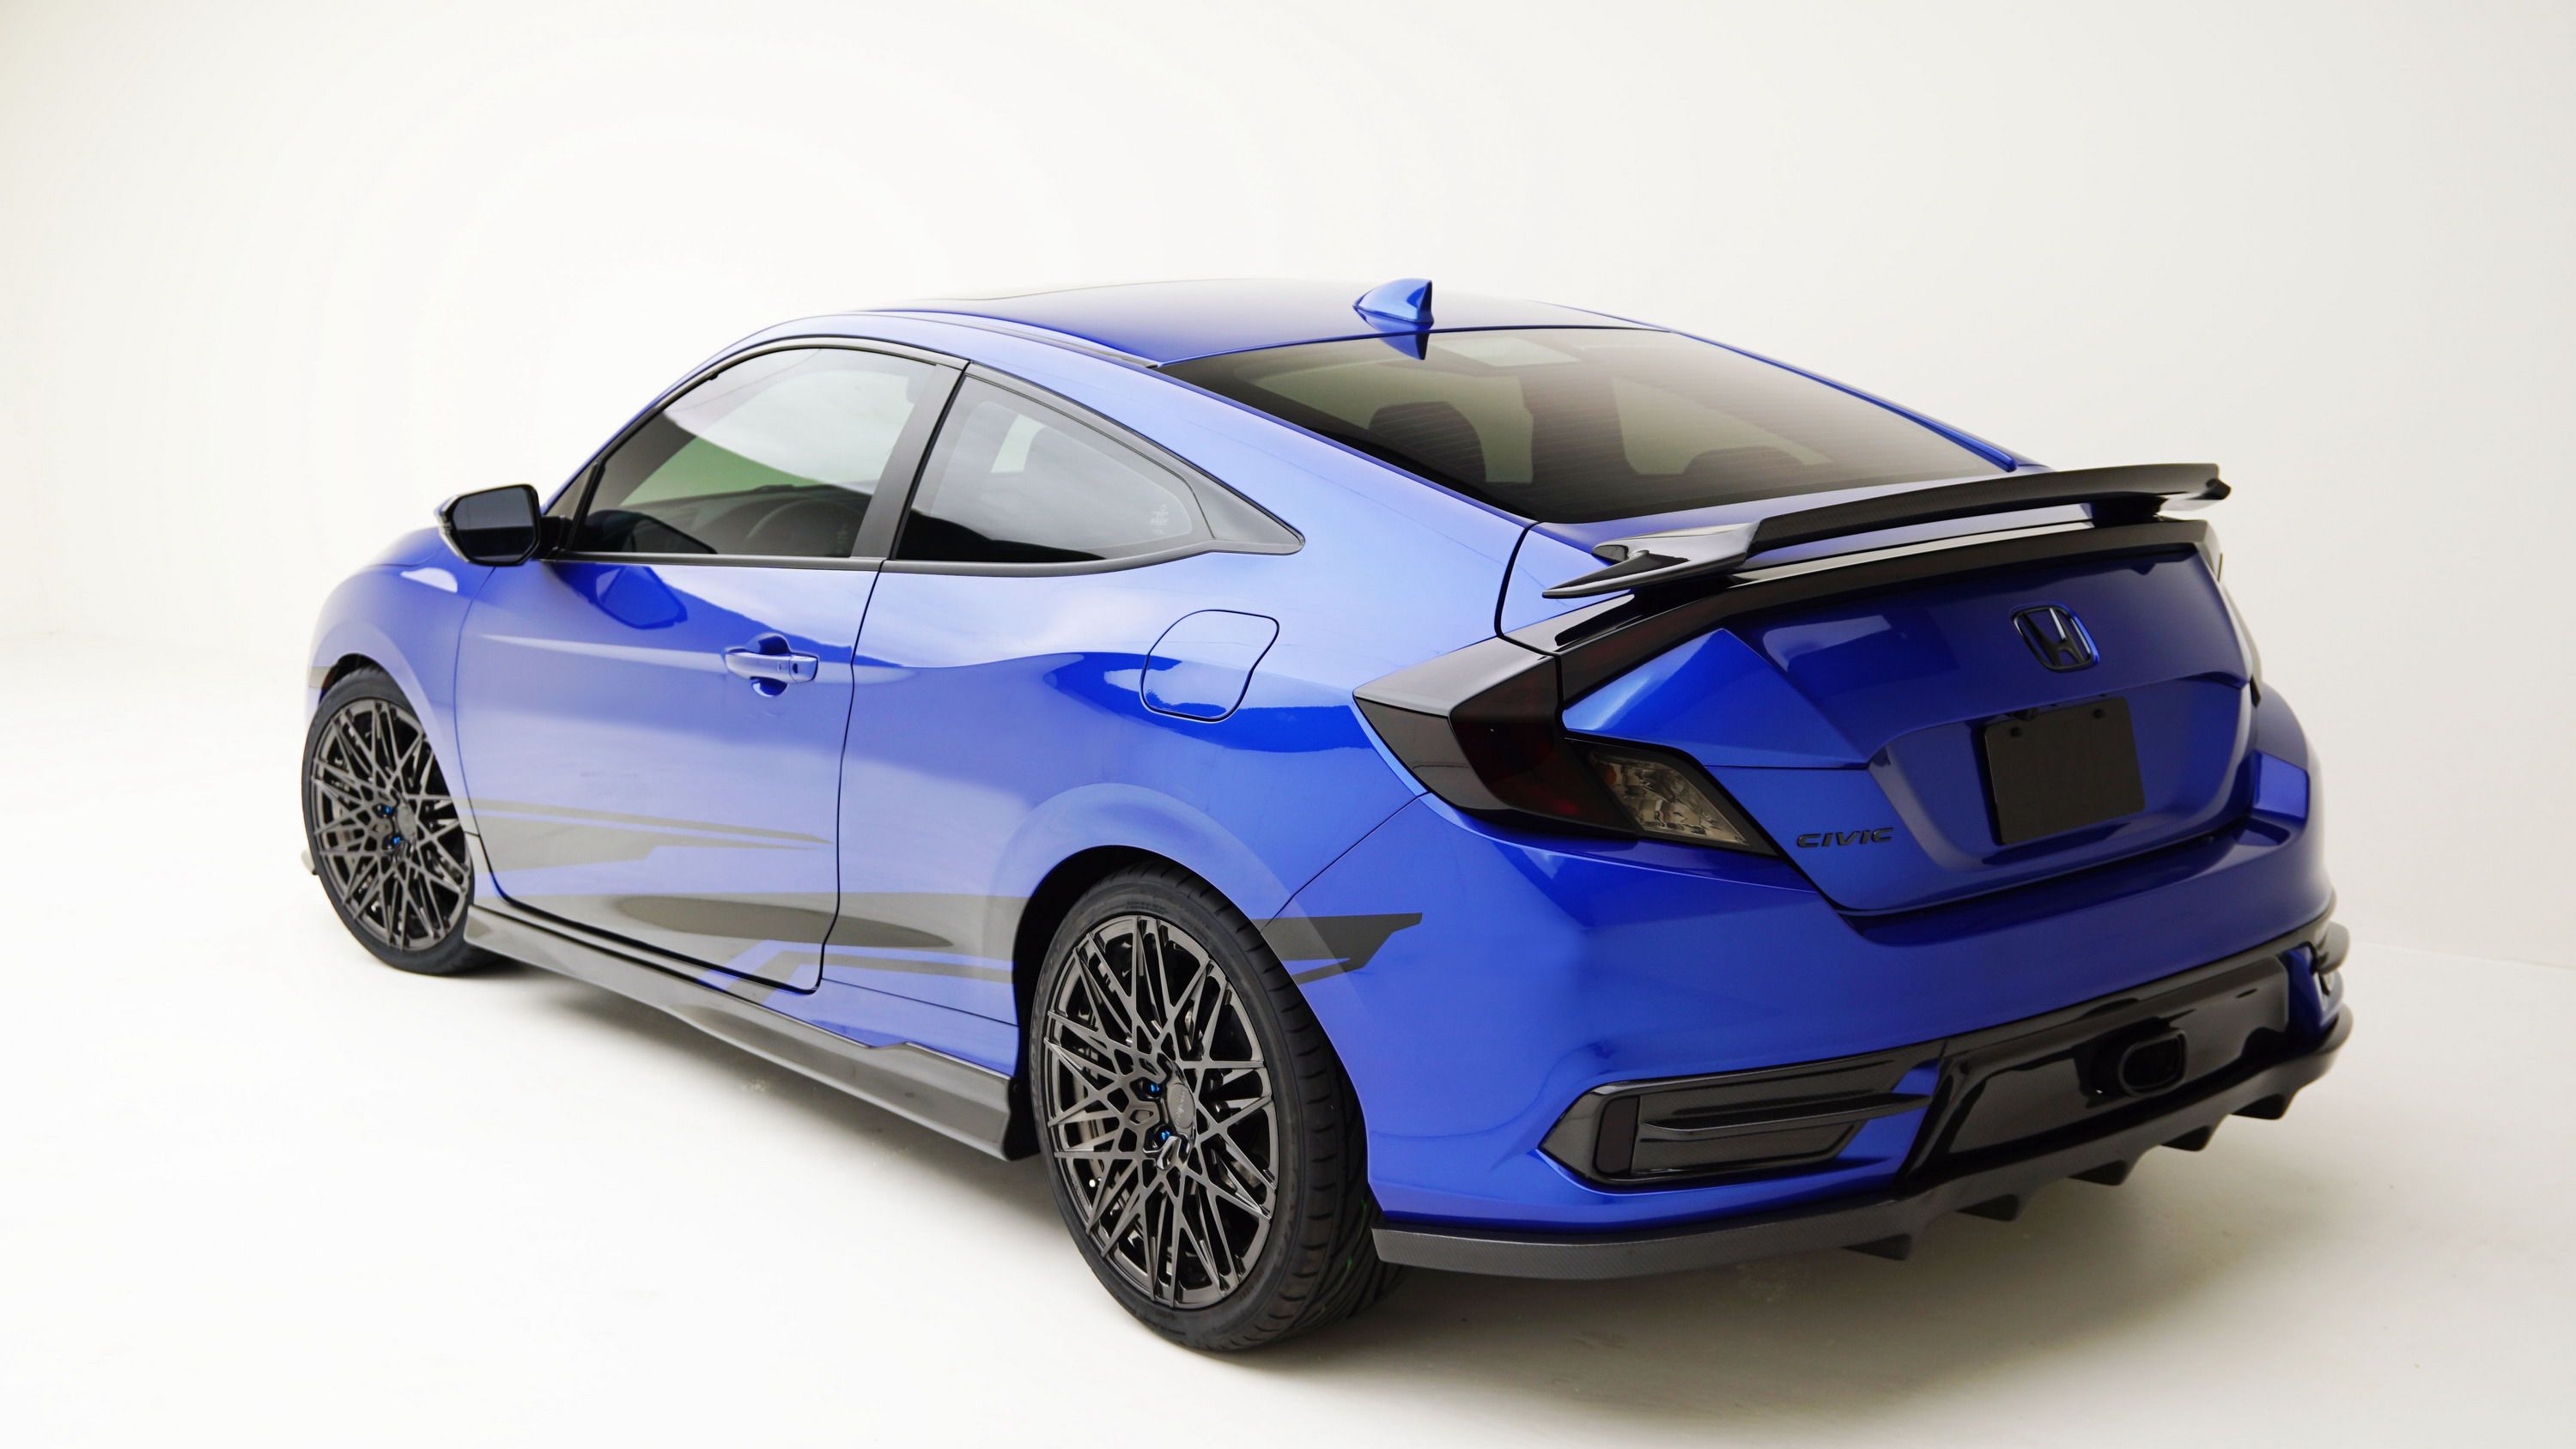 2016 Honda Civic Coupe By MAD Industries